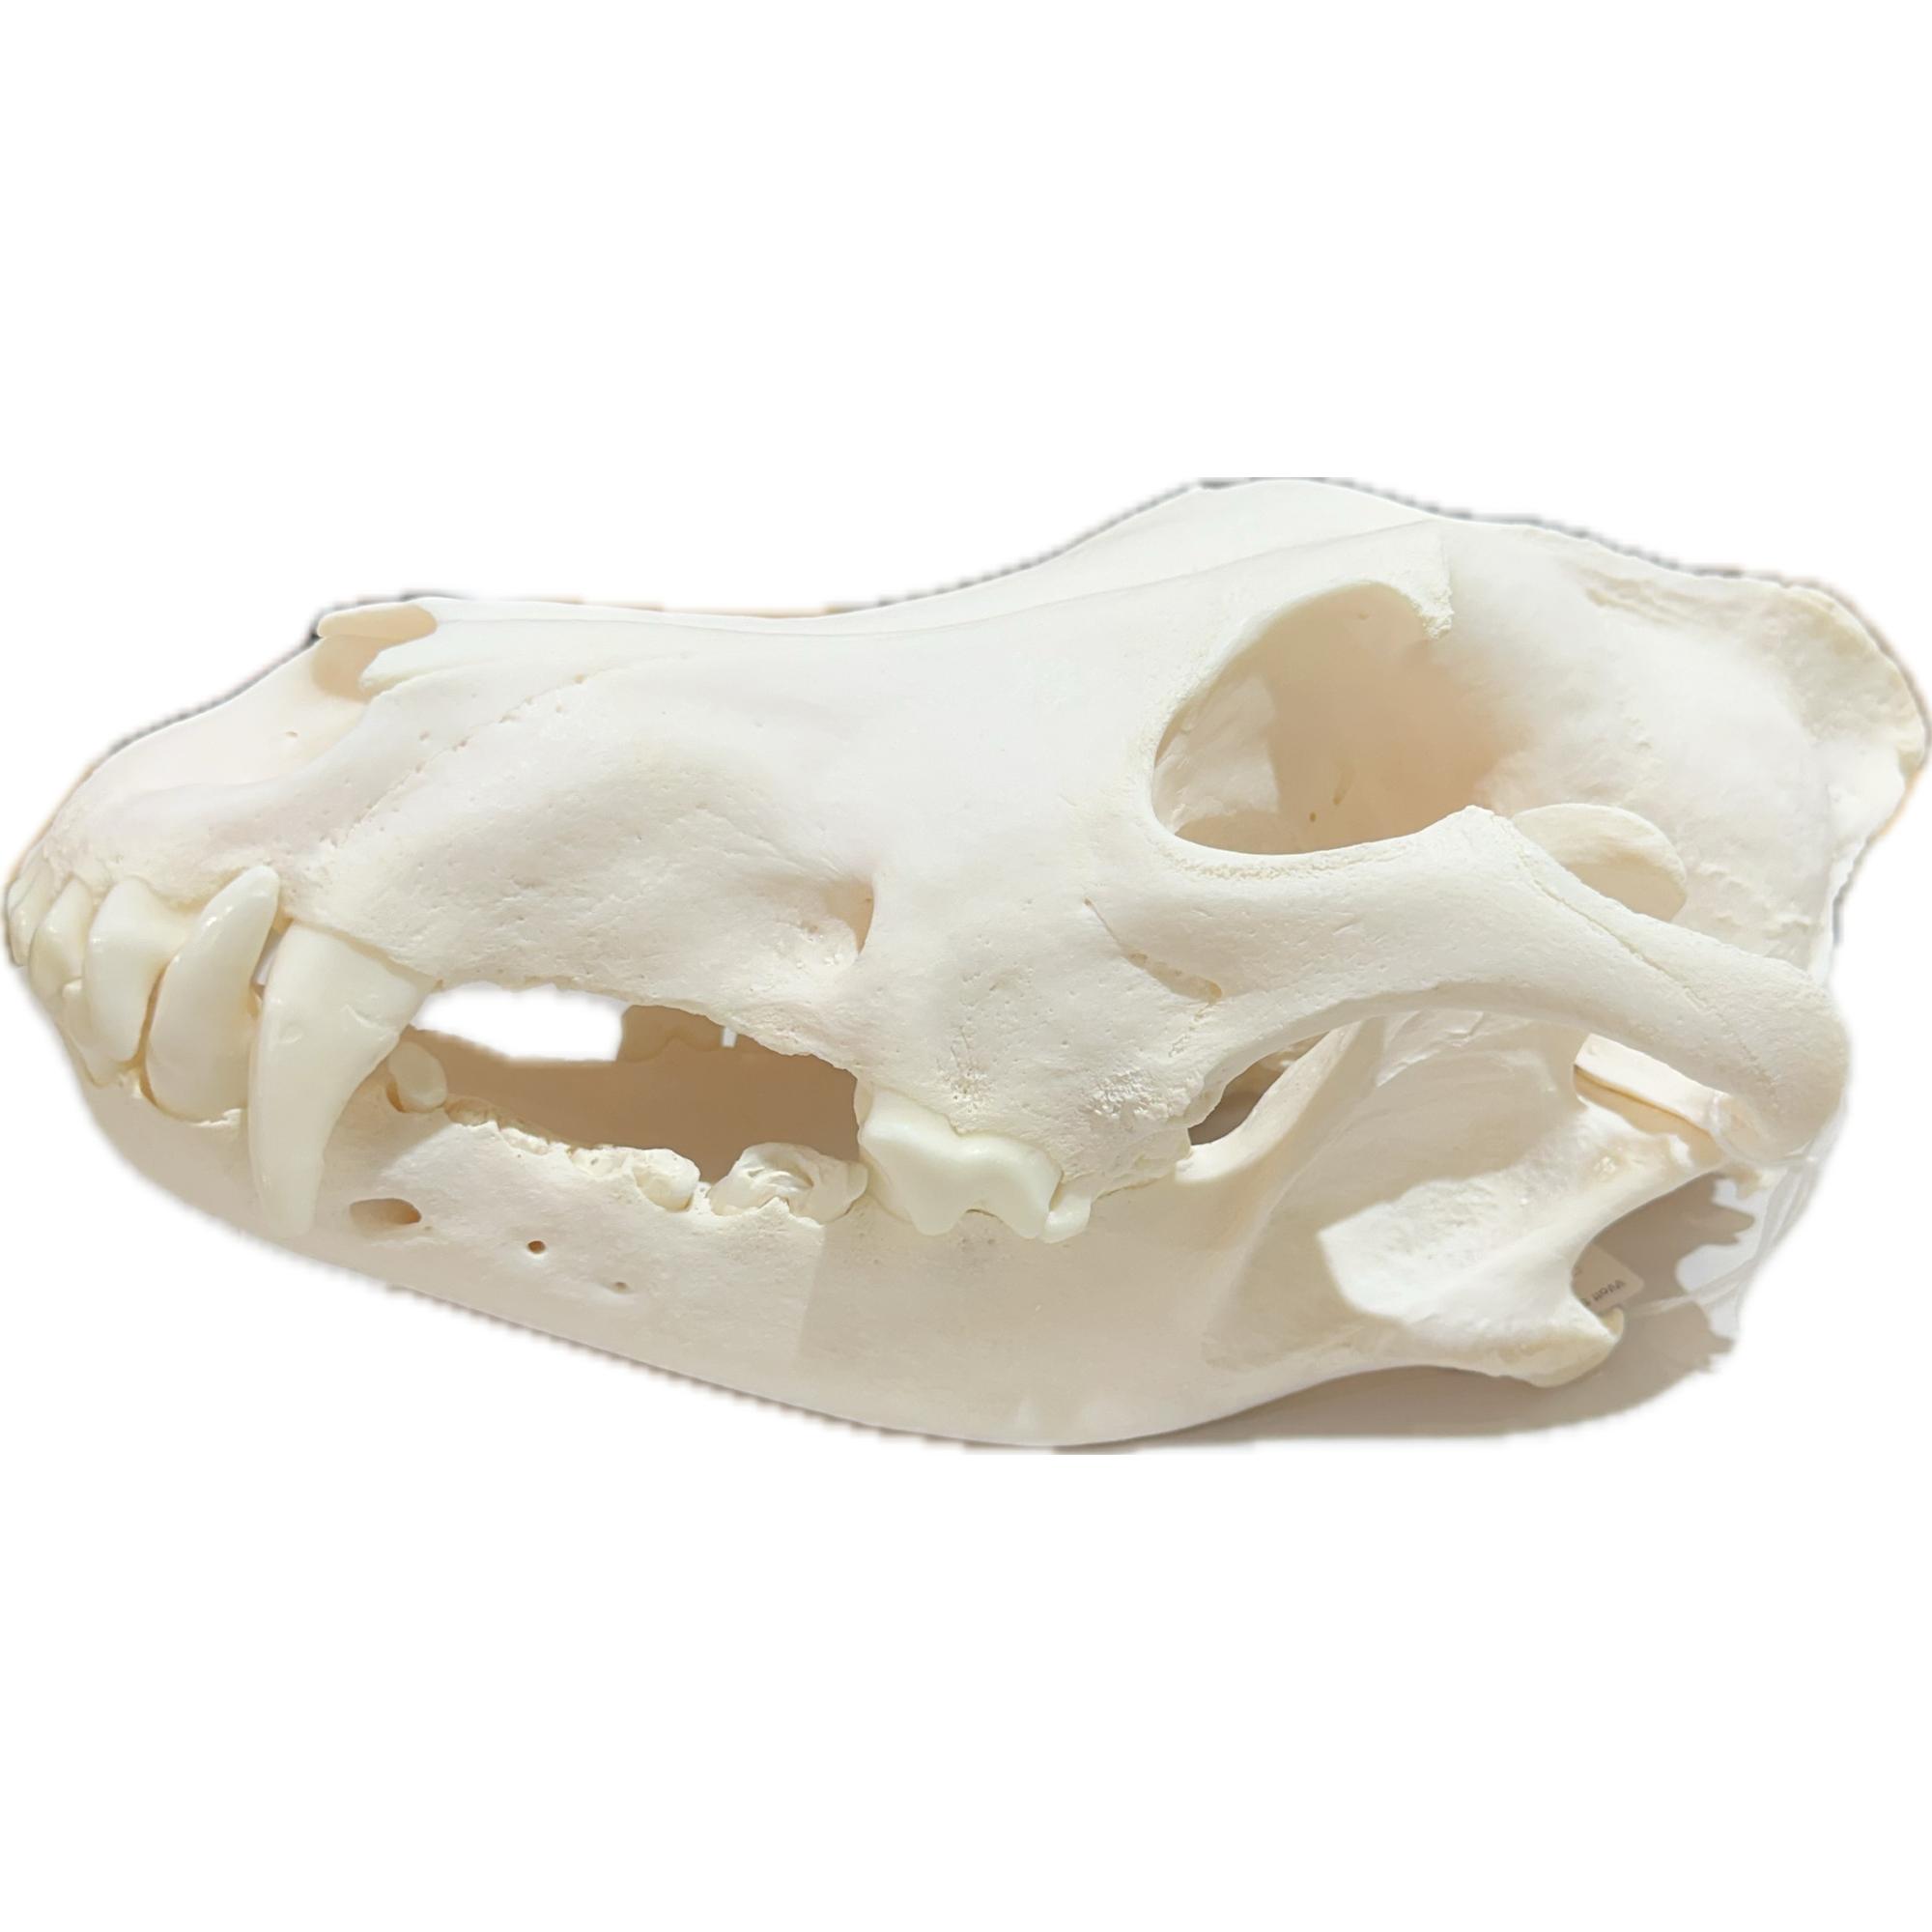 Wolf Skull, Exceptional and Huge Prehistoric Online